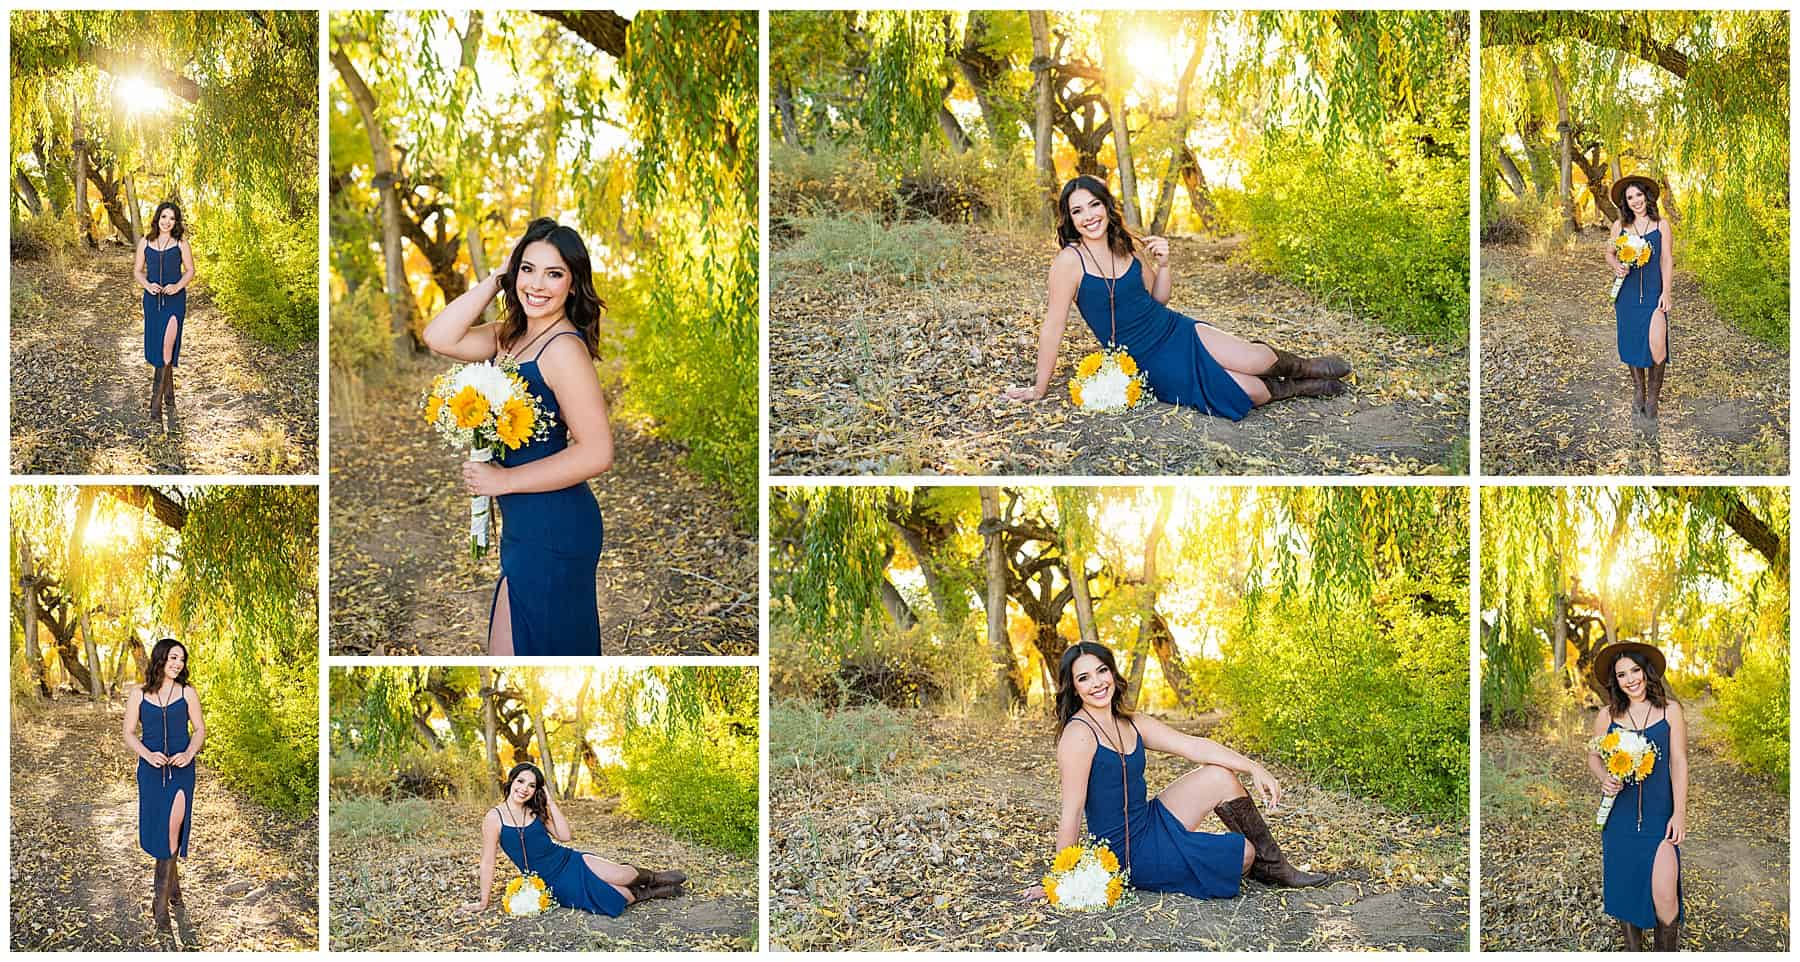 Senior Pictures, Senior Portrait session, pictures with movement, Candid images, Senior pictures filled with personality, Headshots, High School Senior, New Mexico Photographer , Albuquerque photographer, Santa Fe Photographer